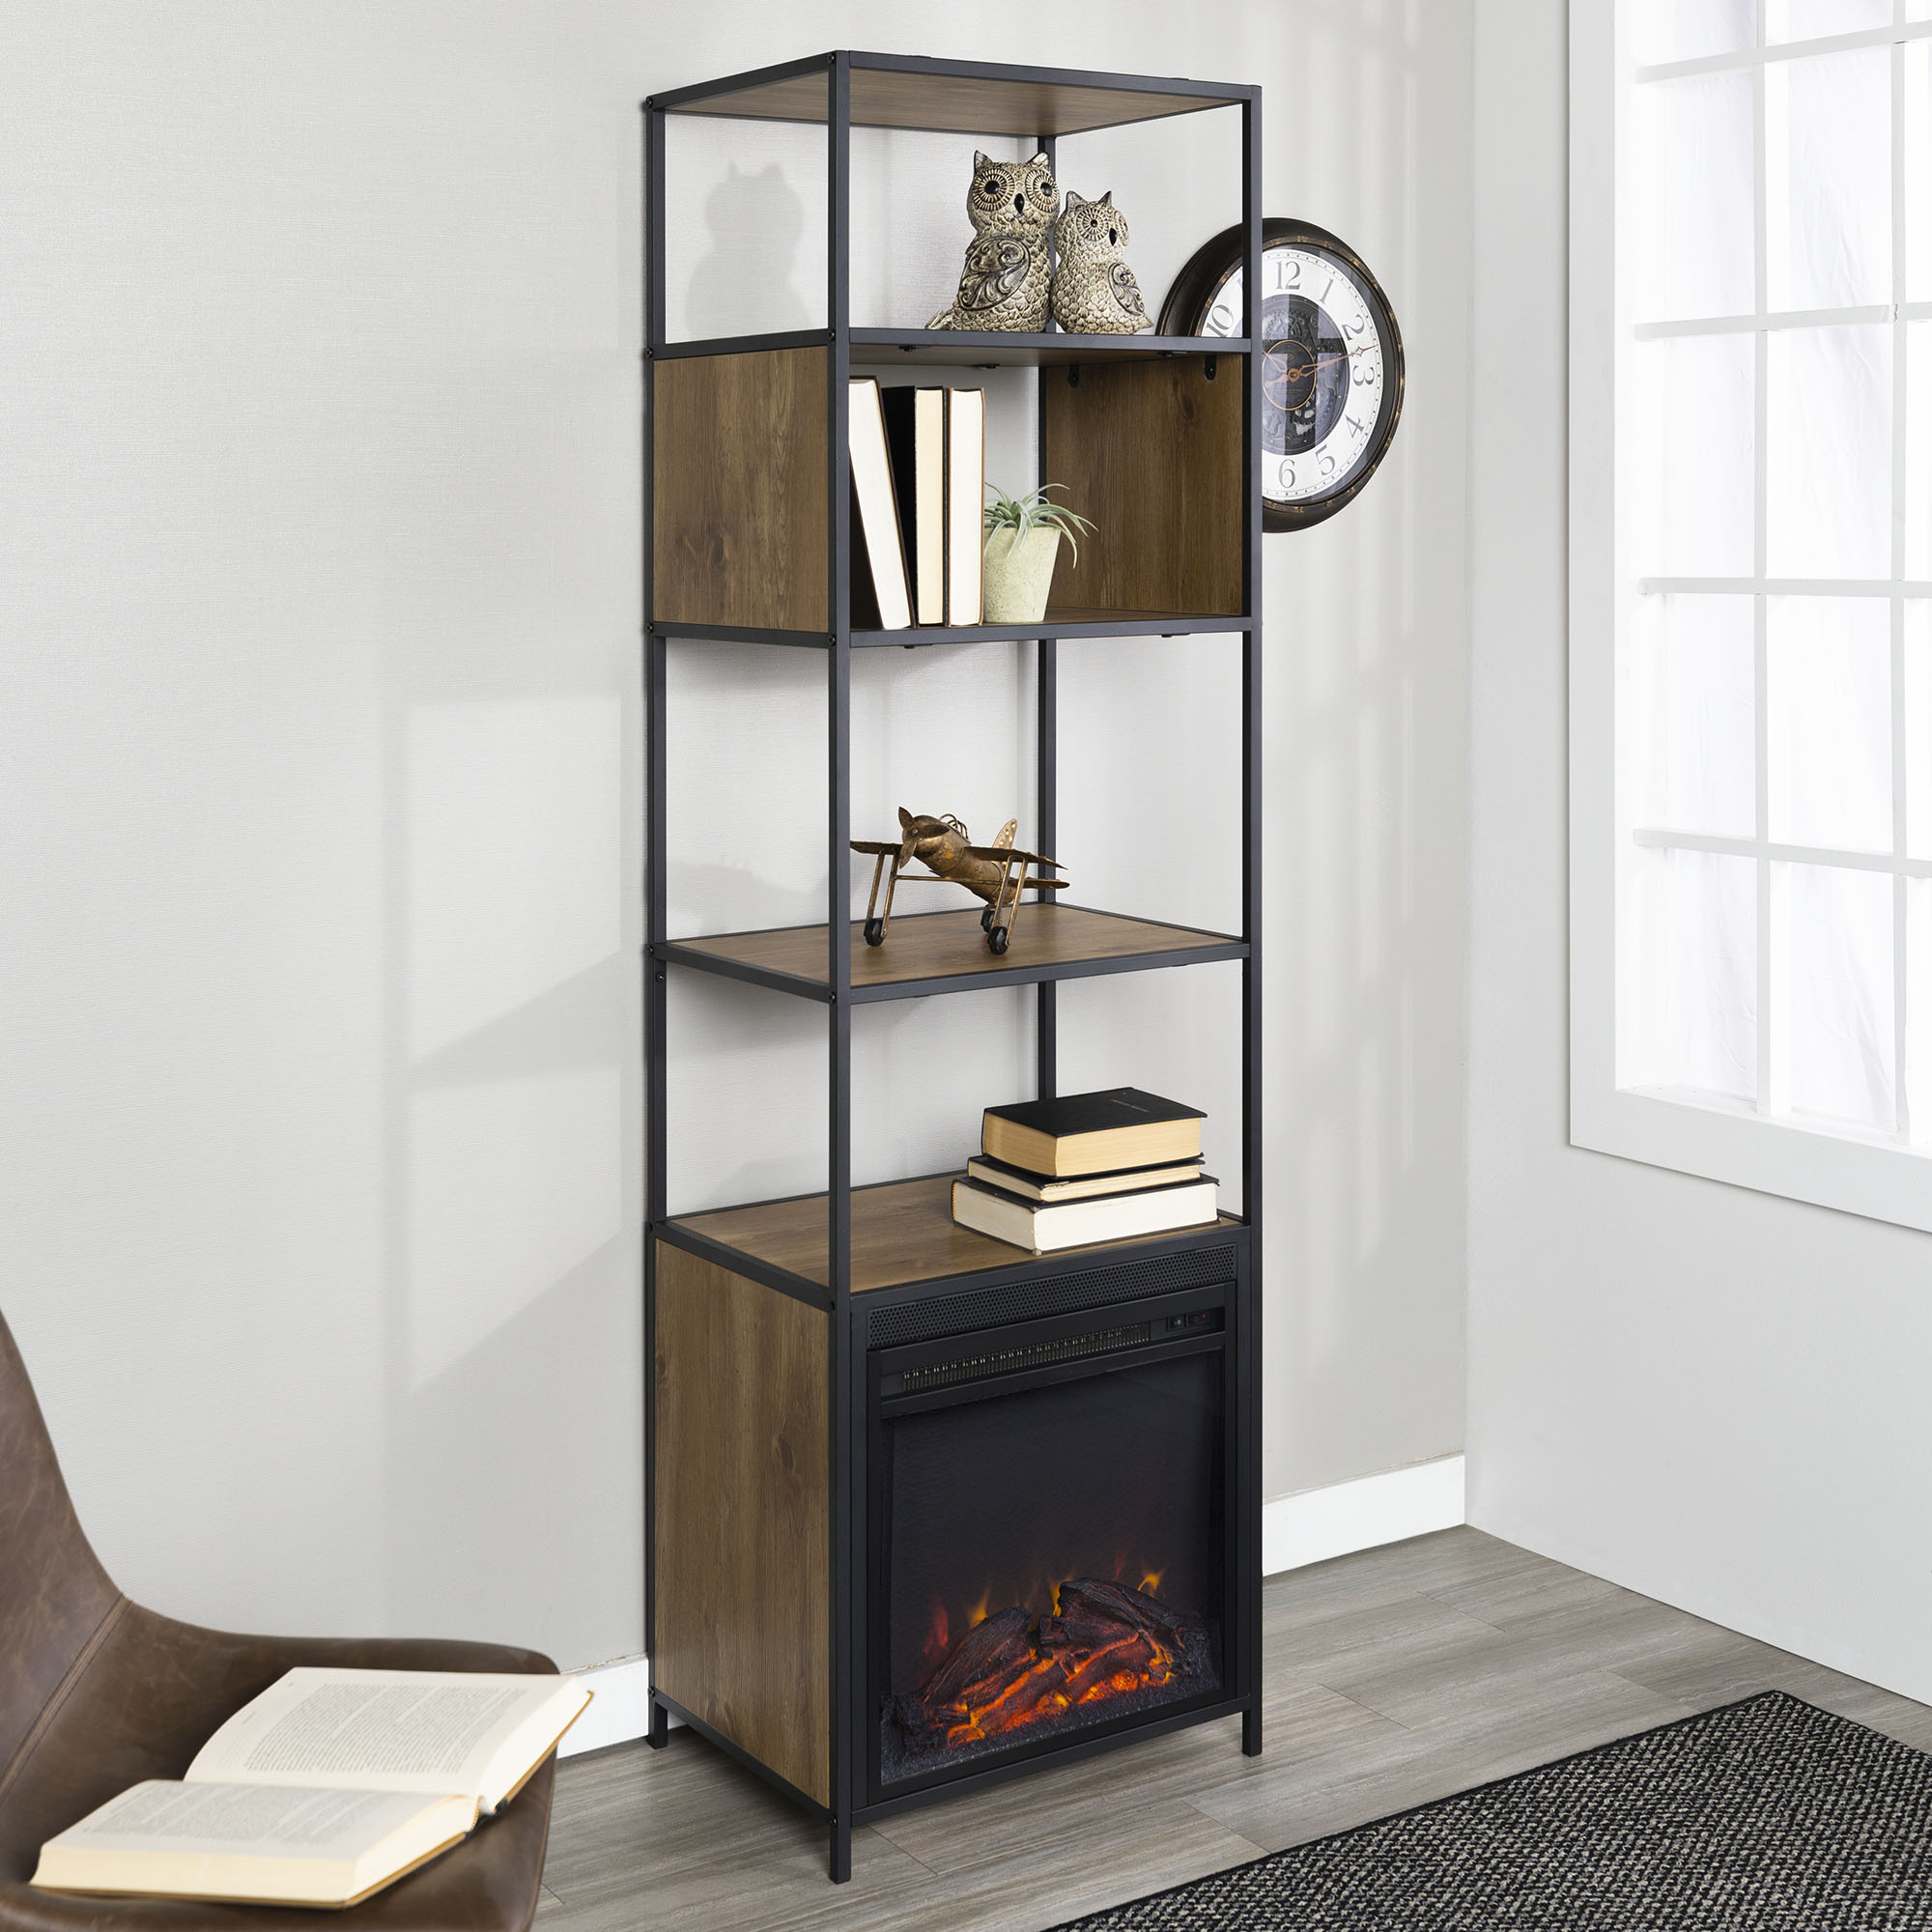 Mainstays Atmore 4-Shelf Media Tower with Fireplace - image 3 of 16